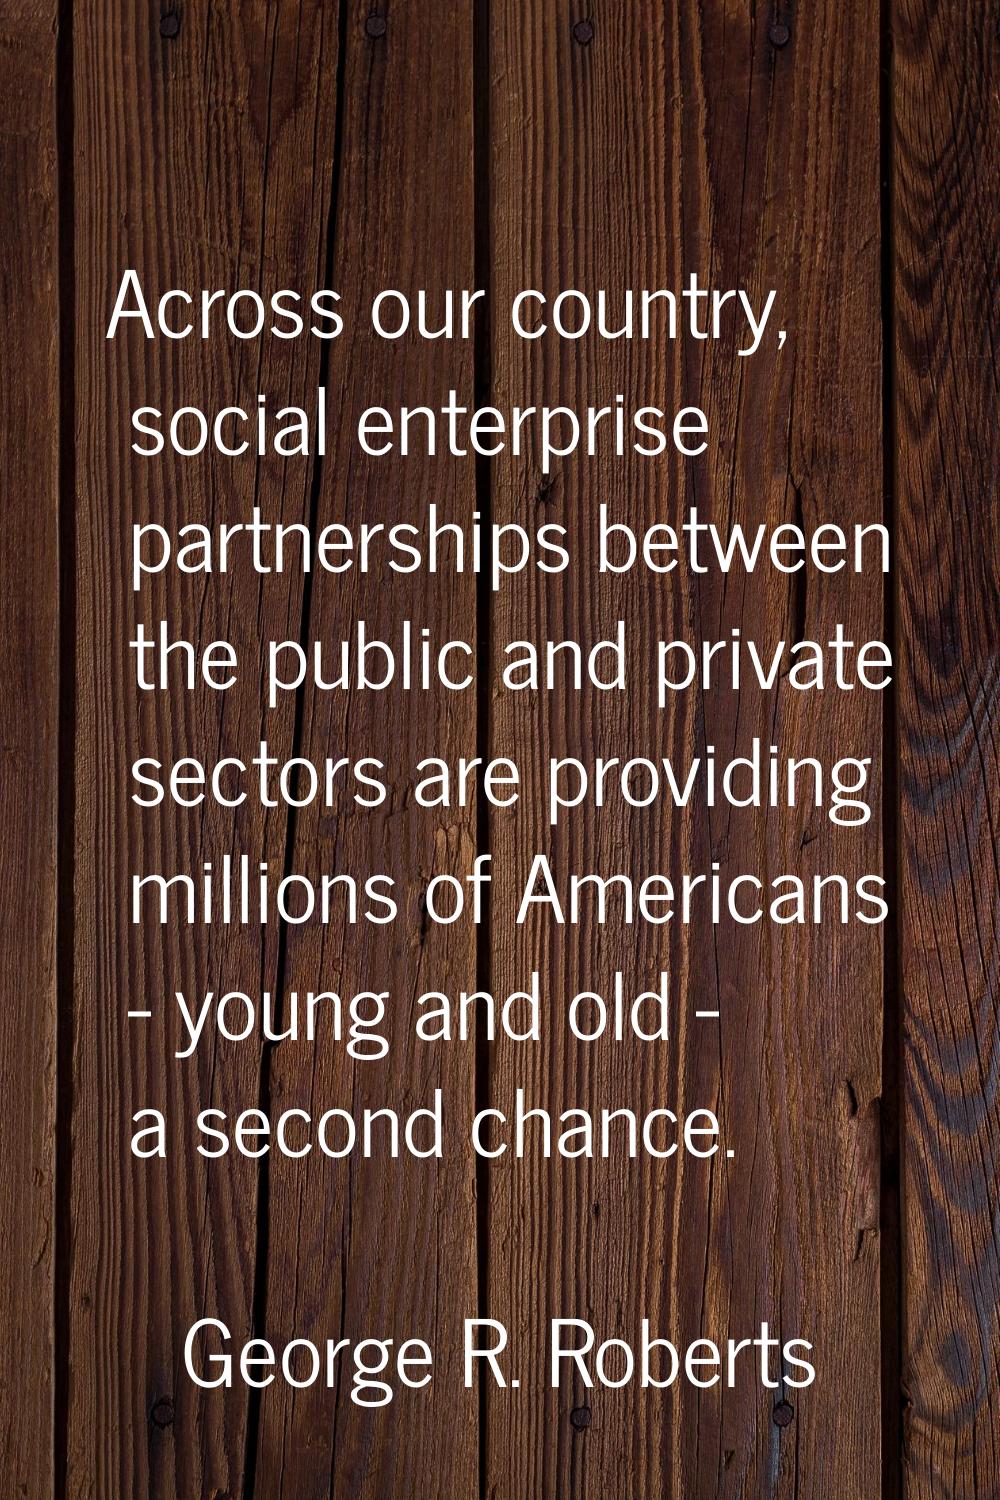 Across our country, social enterprise partnerships between the public and private sectors are provi